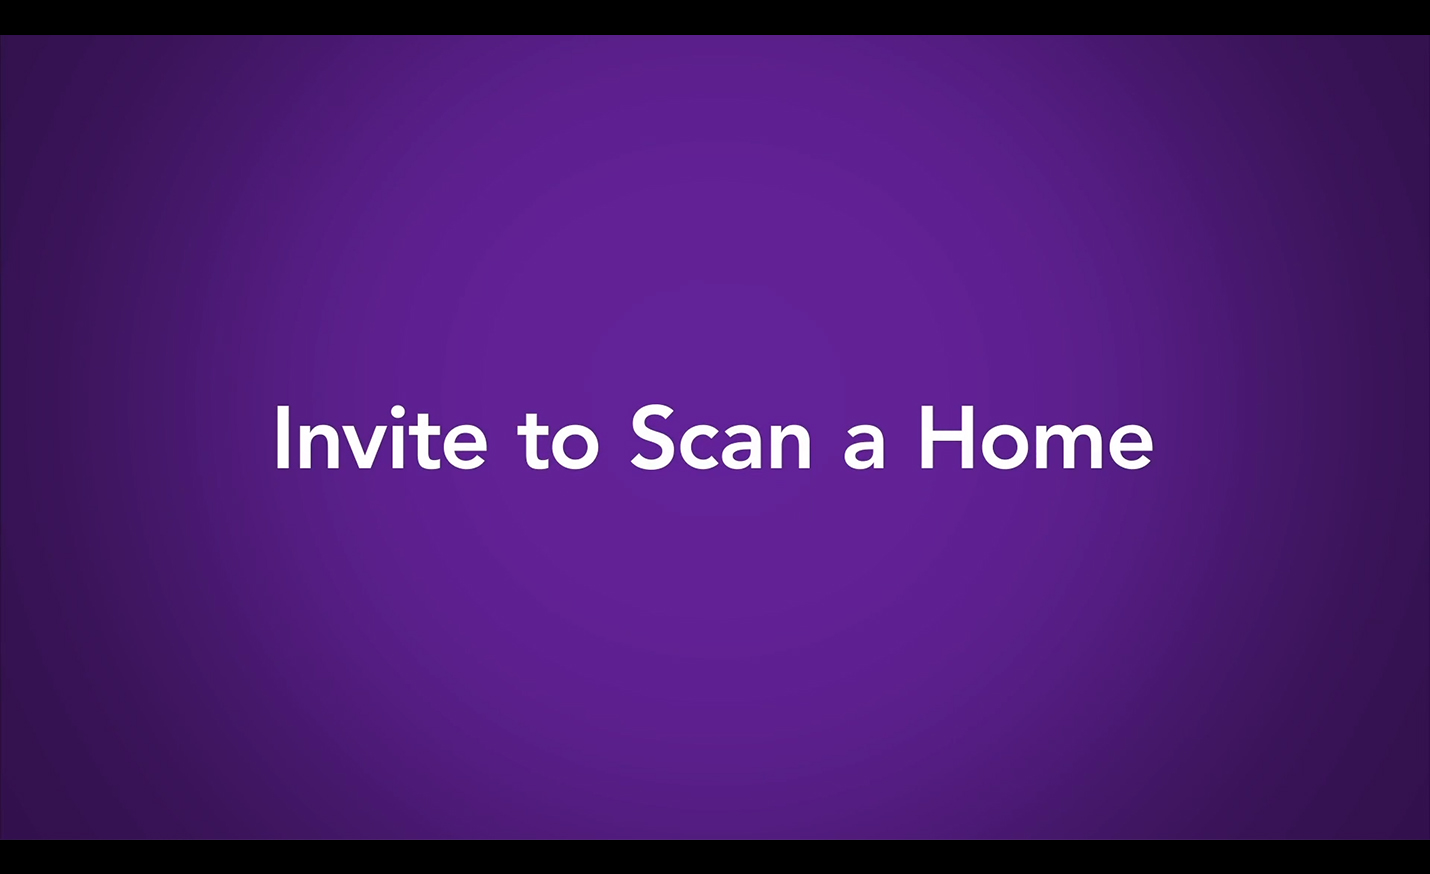 Invite to scan a home video